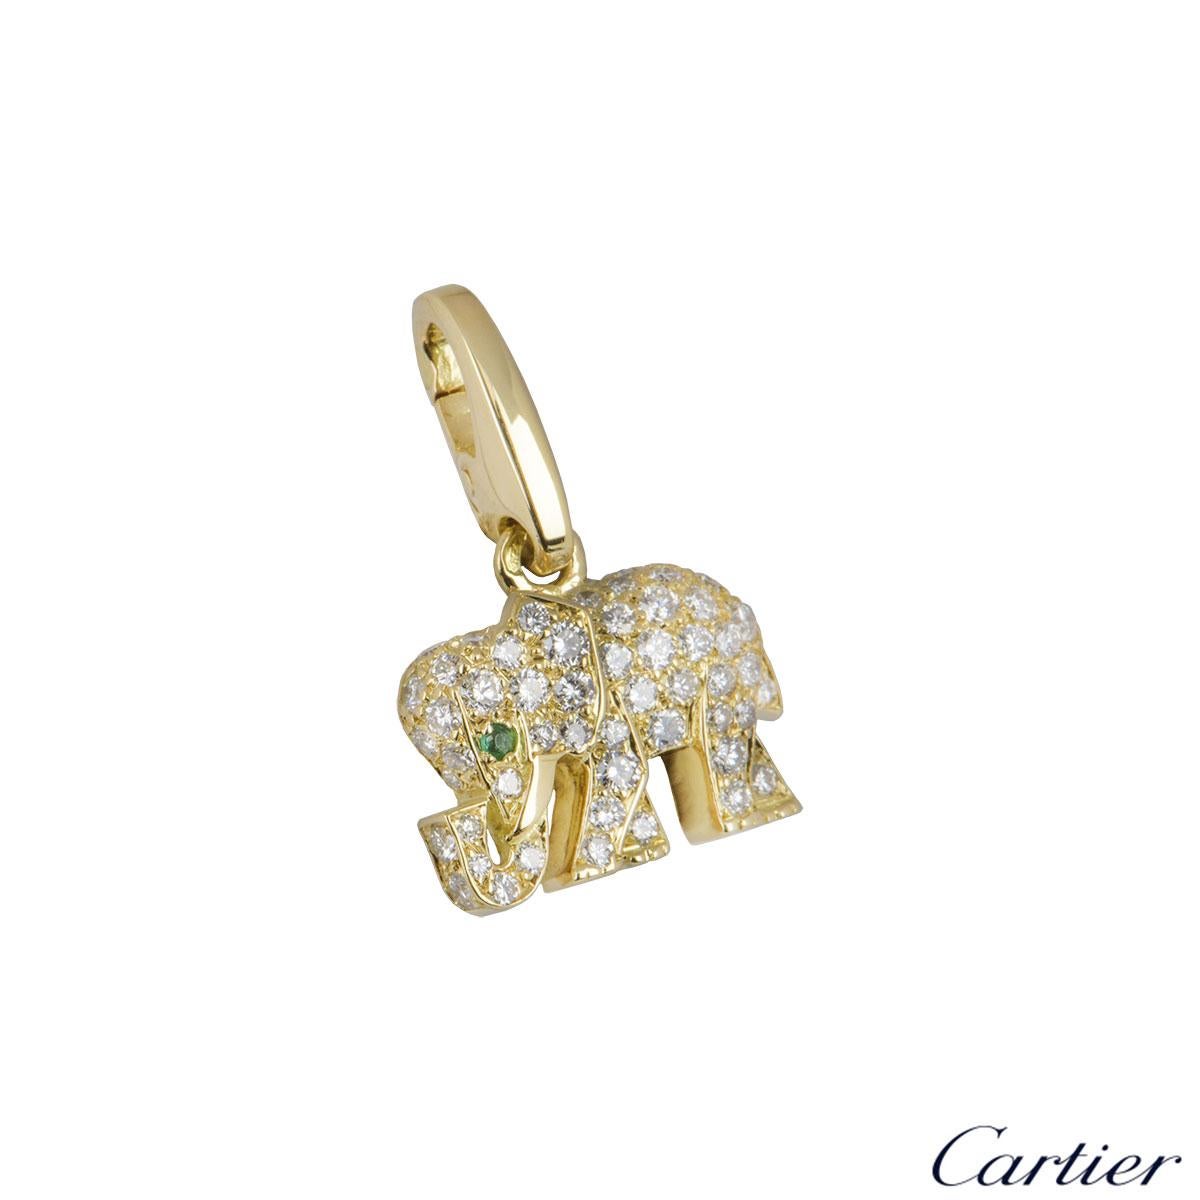 An 18k yellow gold diamond Cartier charm. The charm comprises of an elephant motif encrusted with approximately 60 round brilliant cut diamonds with a total weight of approximately 0.40ct. The charm has a round cut emerald set for the eye on the